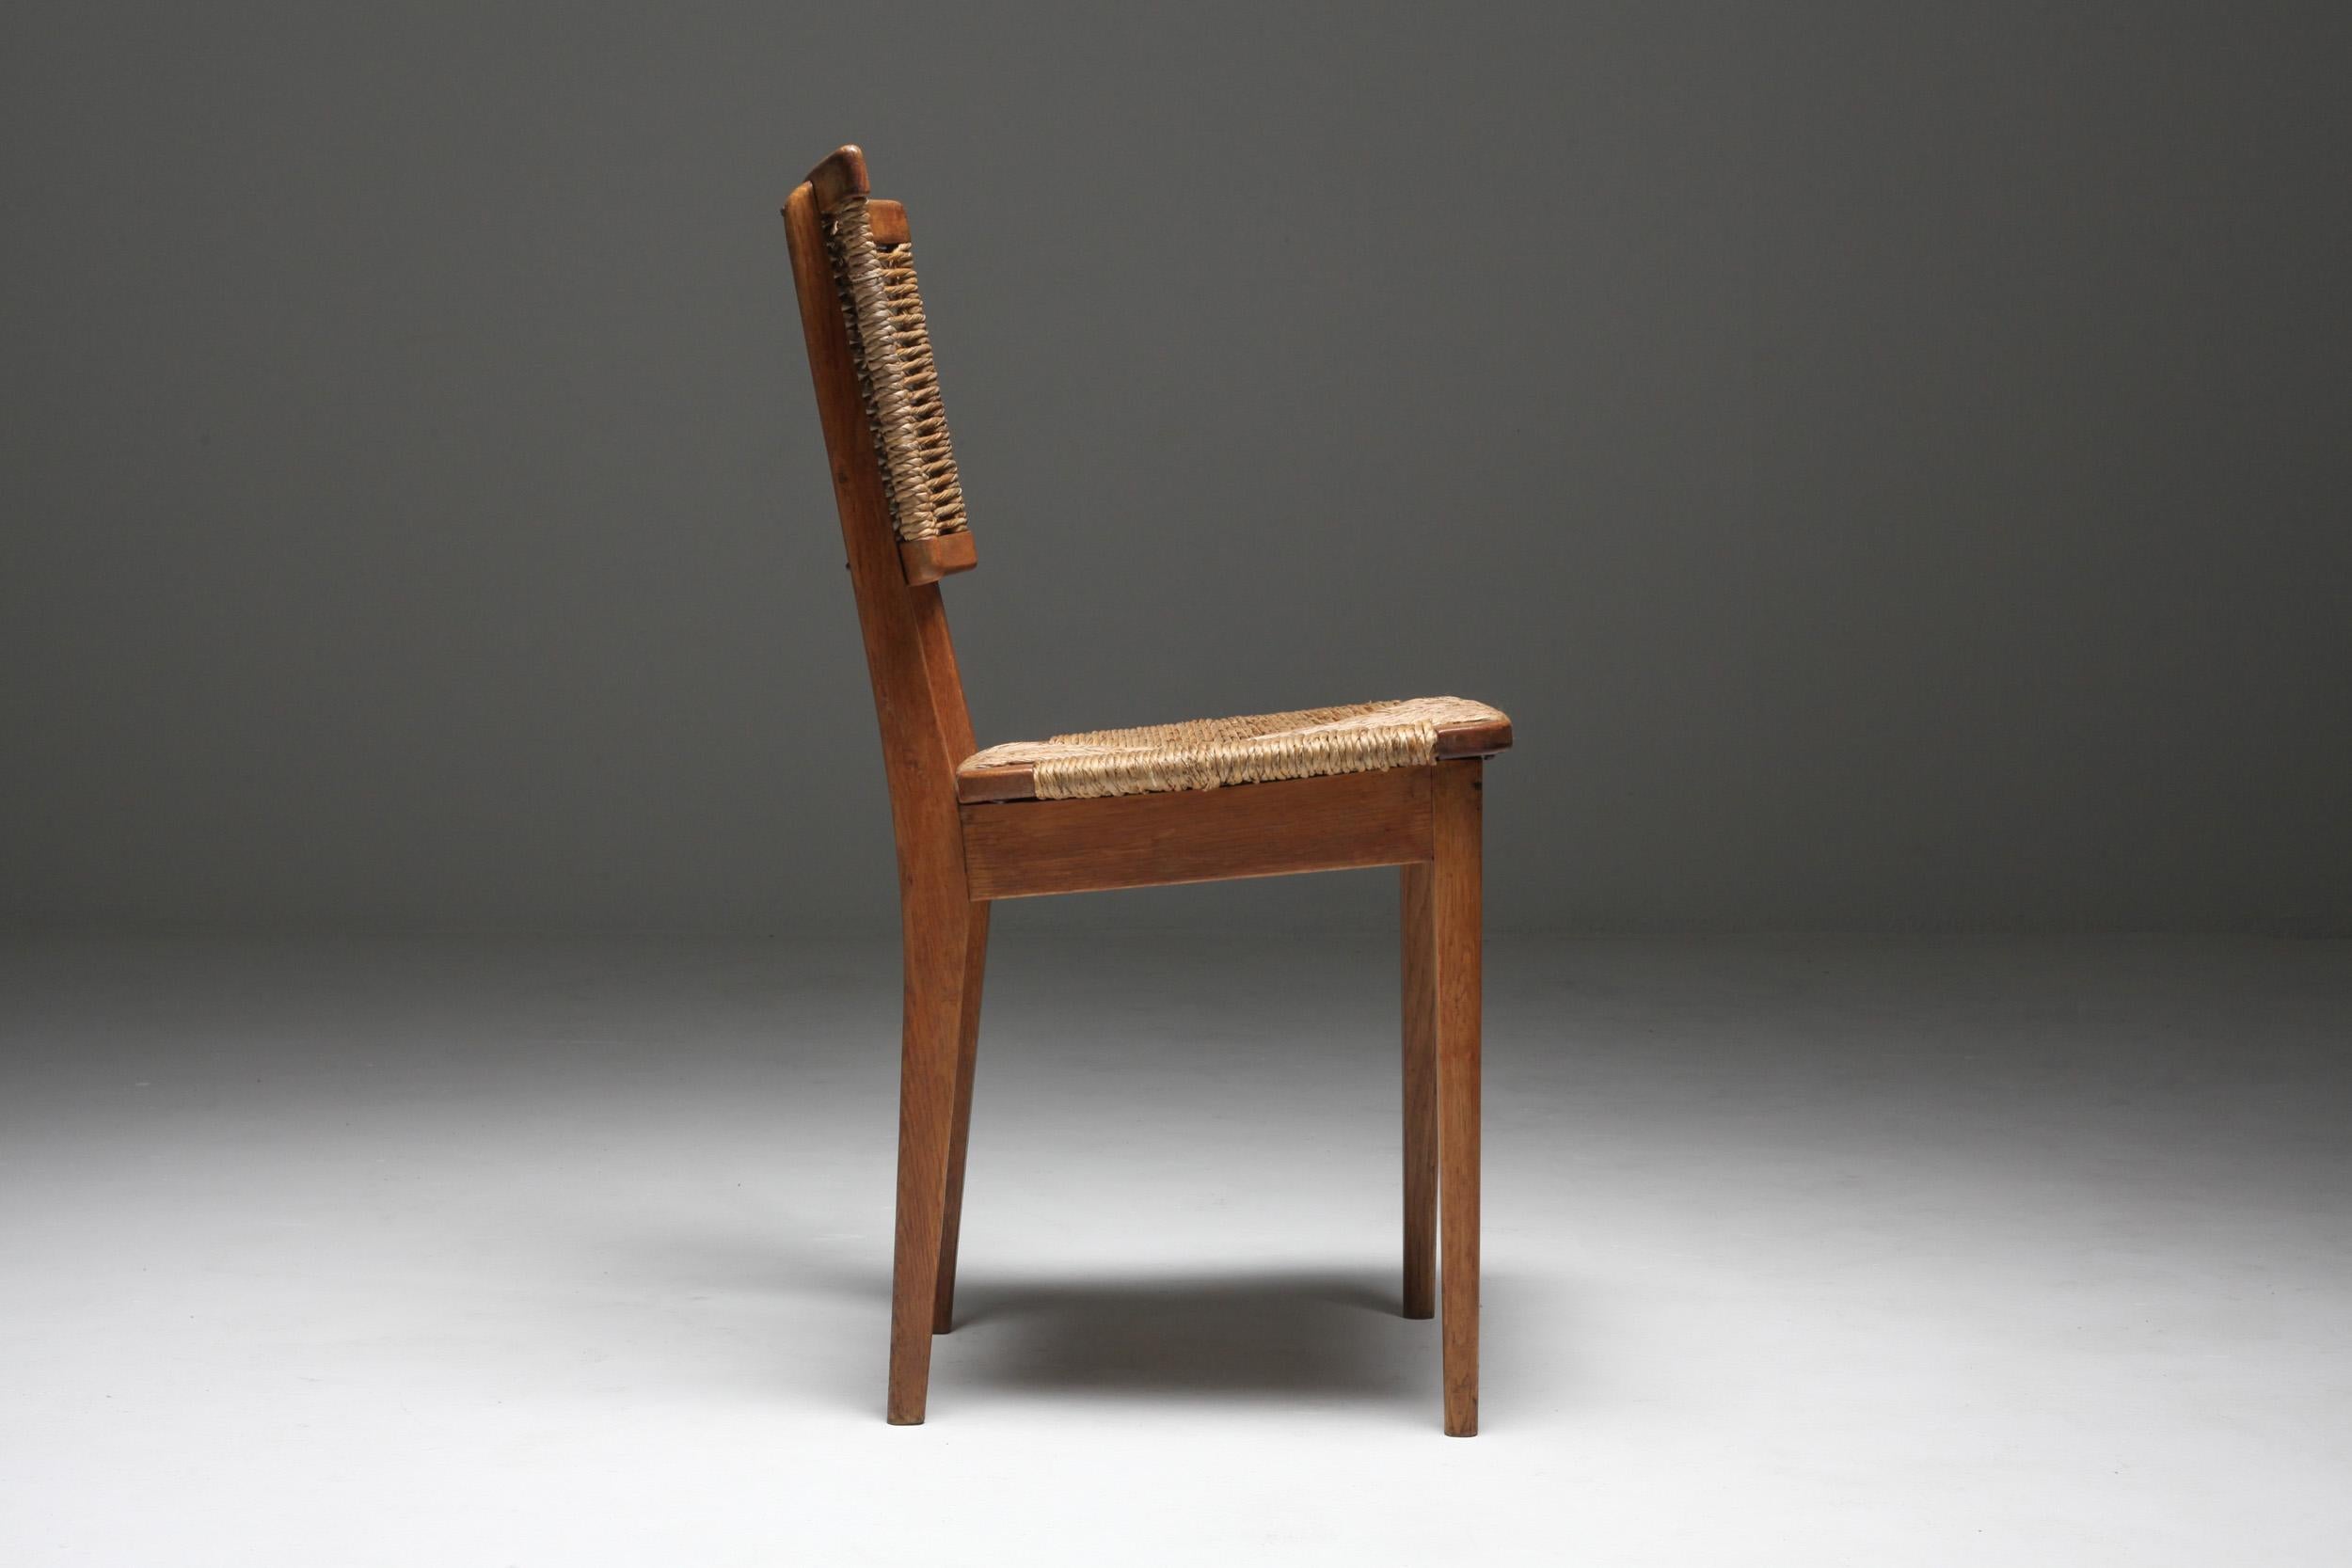 Cord Mart Stam 'A2-1' Chairs in Oak and Straw, 1947